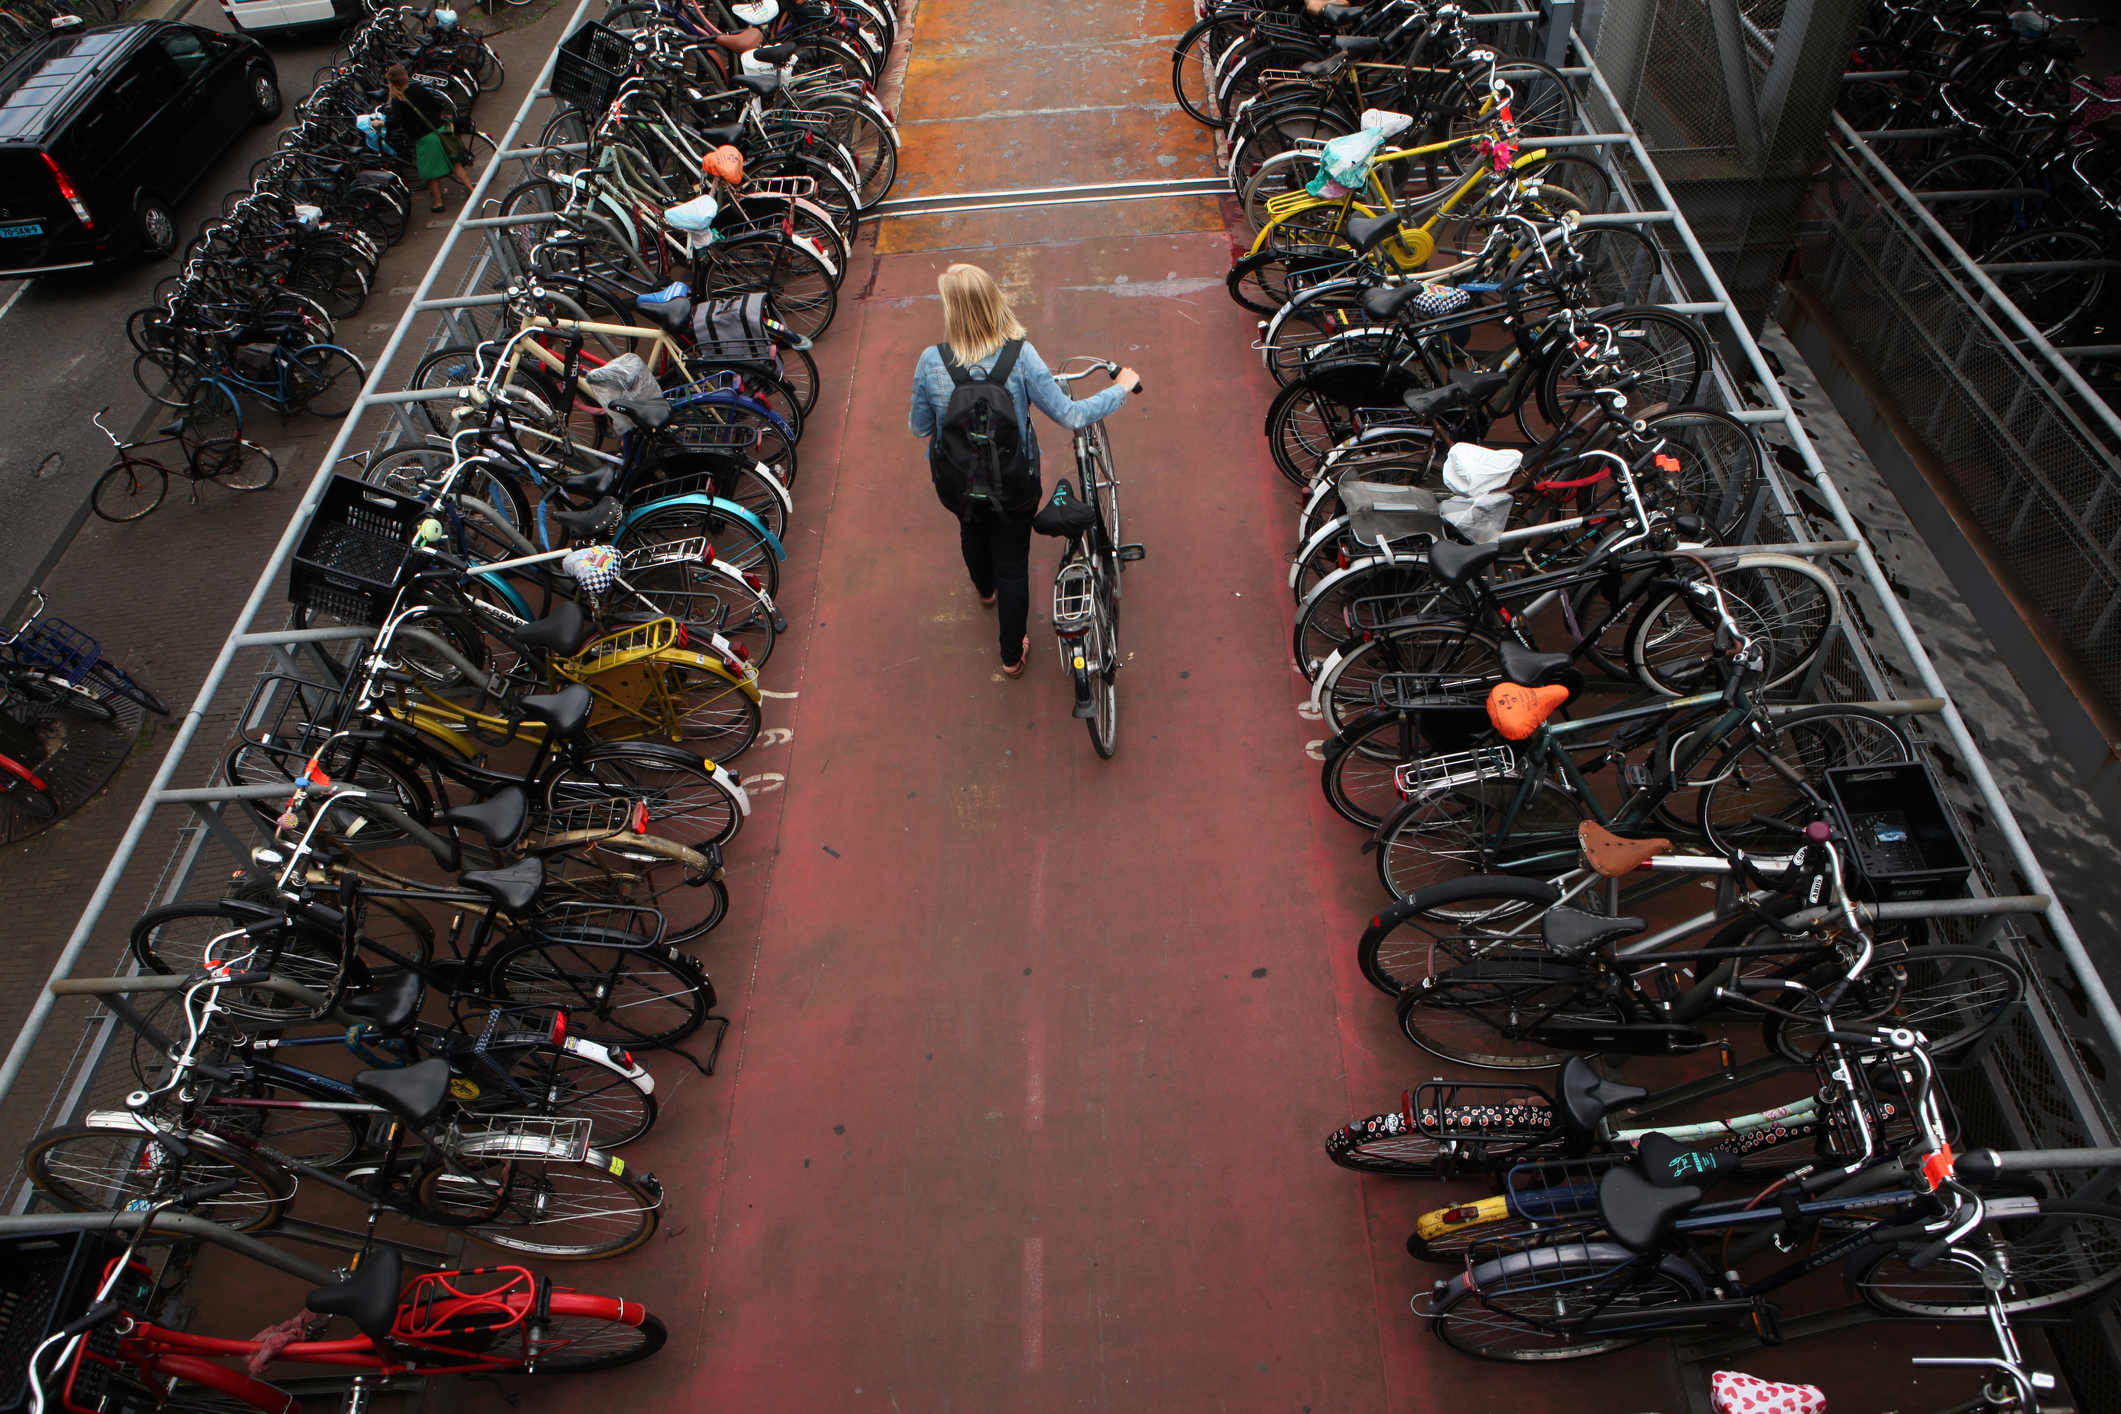 Bike parking can be just as much of a challenge as car parking